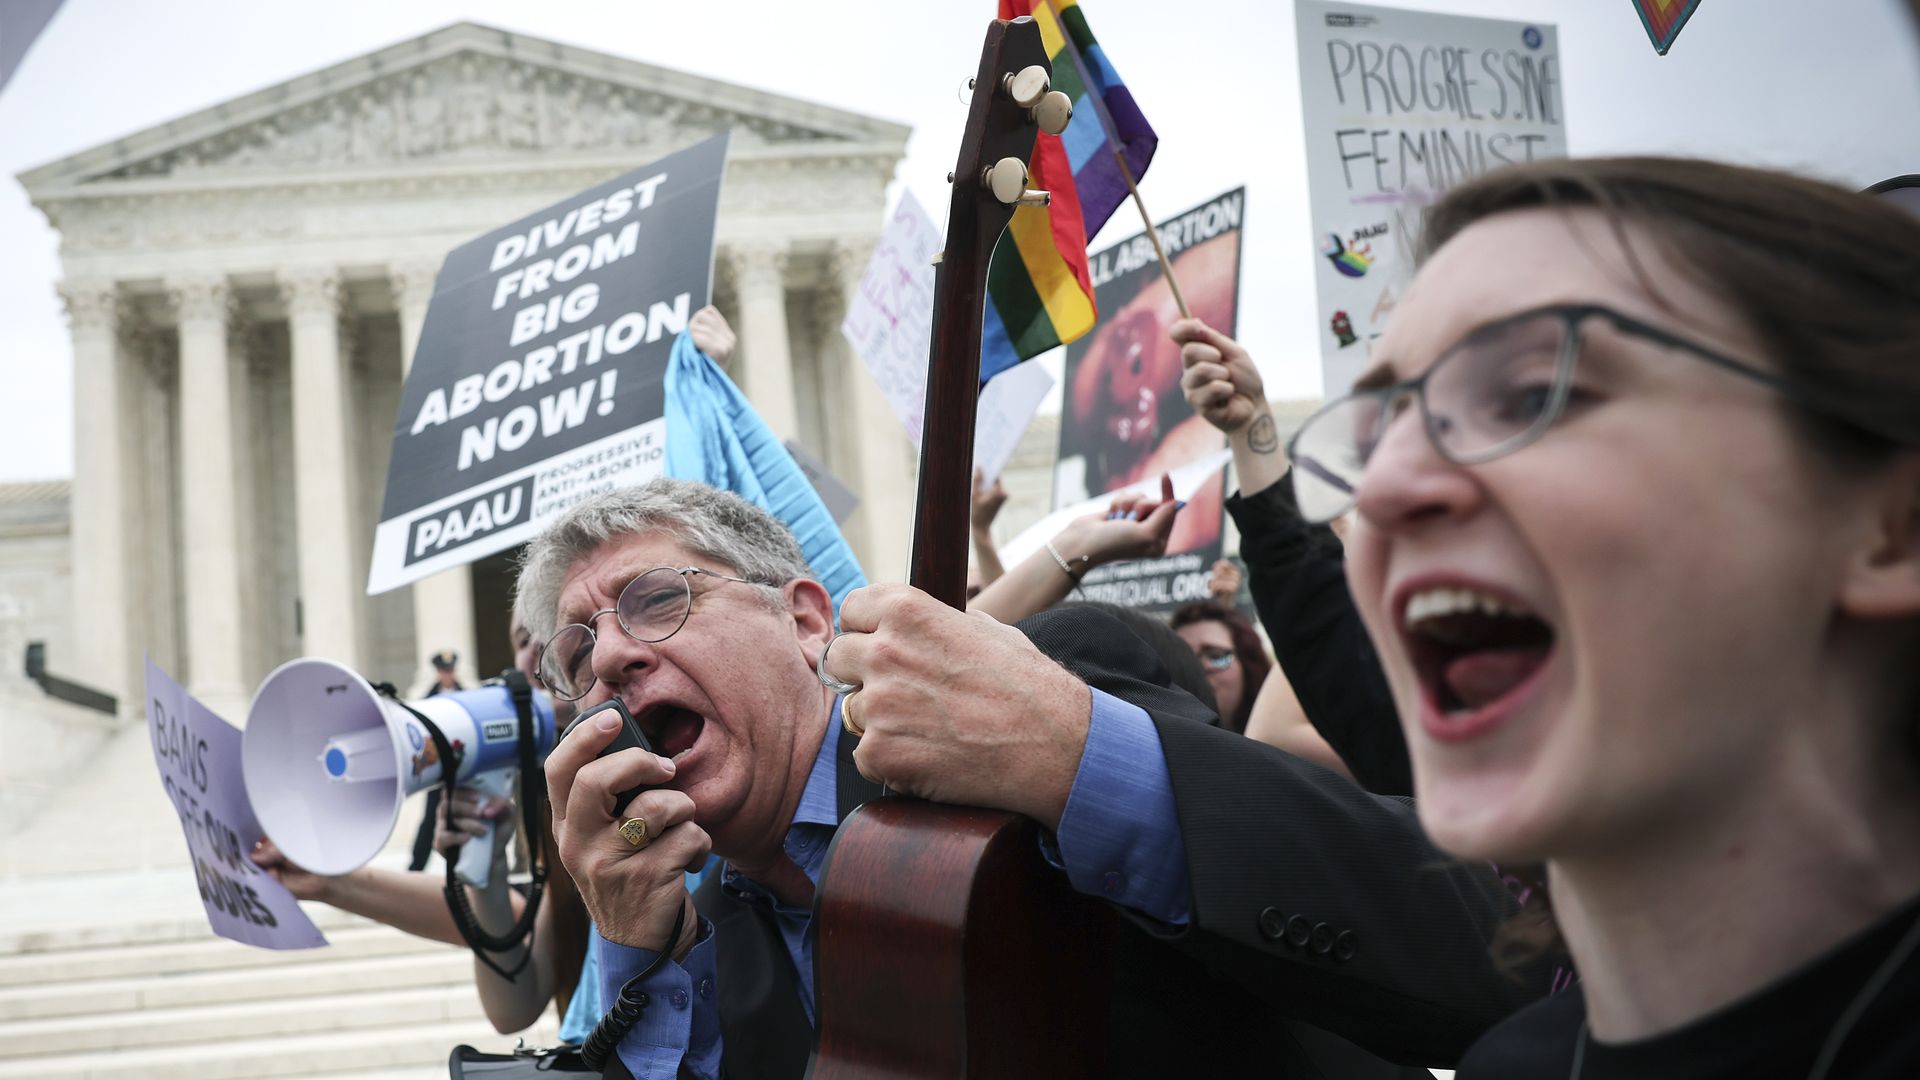 Protestors are seen outside the Supreme Court after the leak of a draft opinion overturning Roe v. Wade.